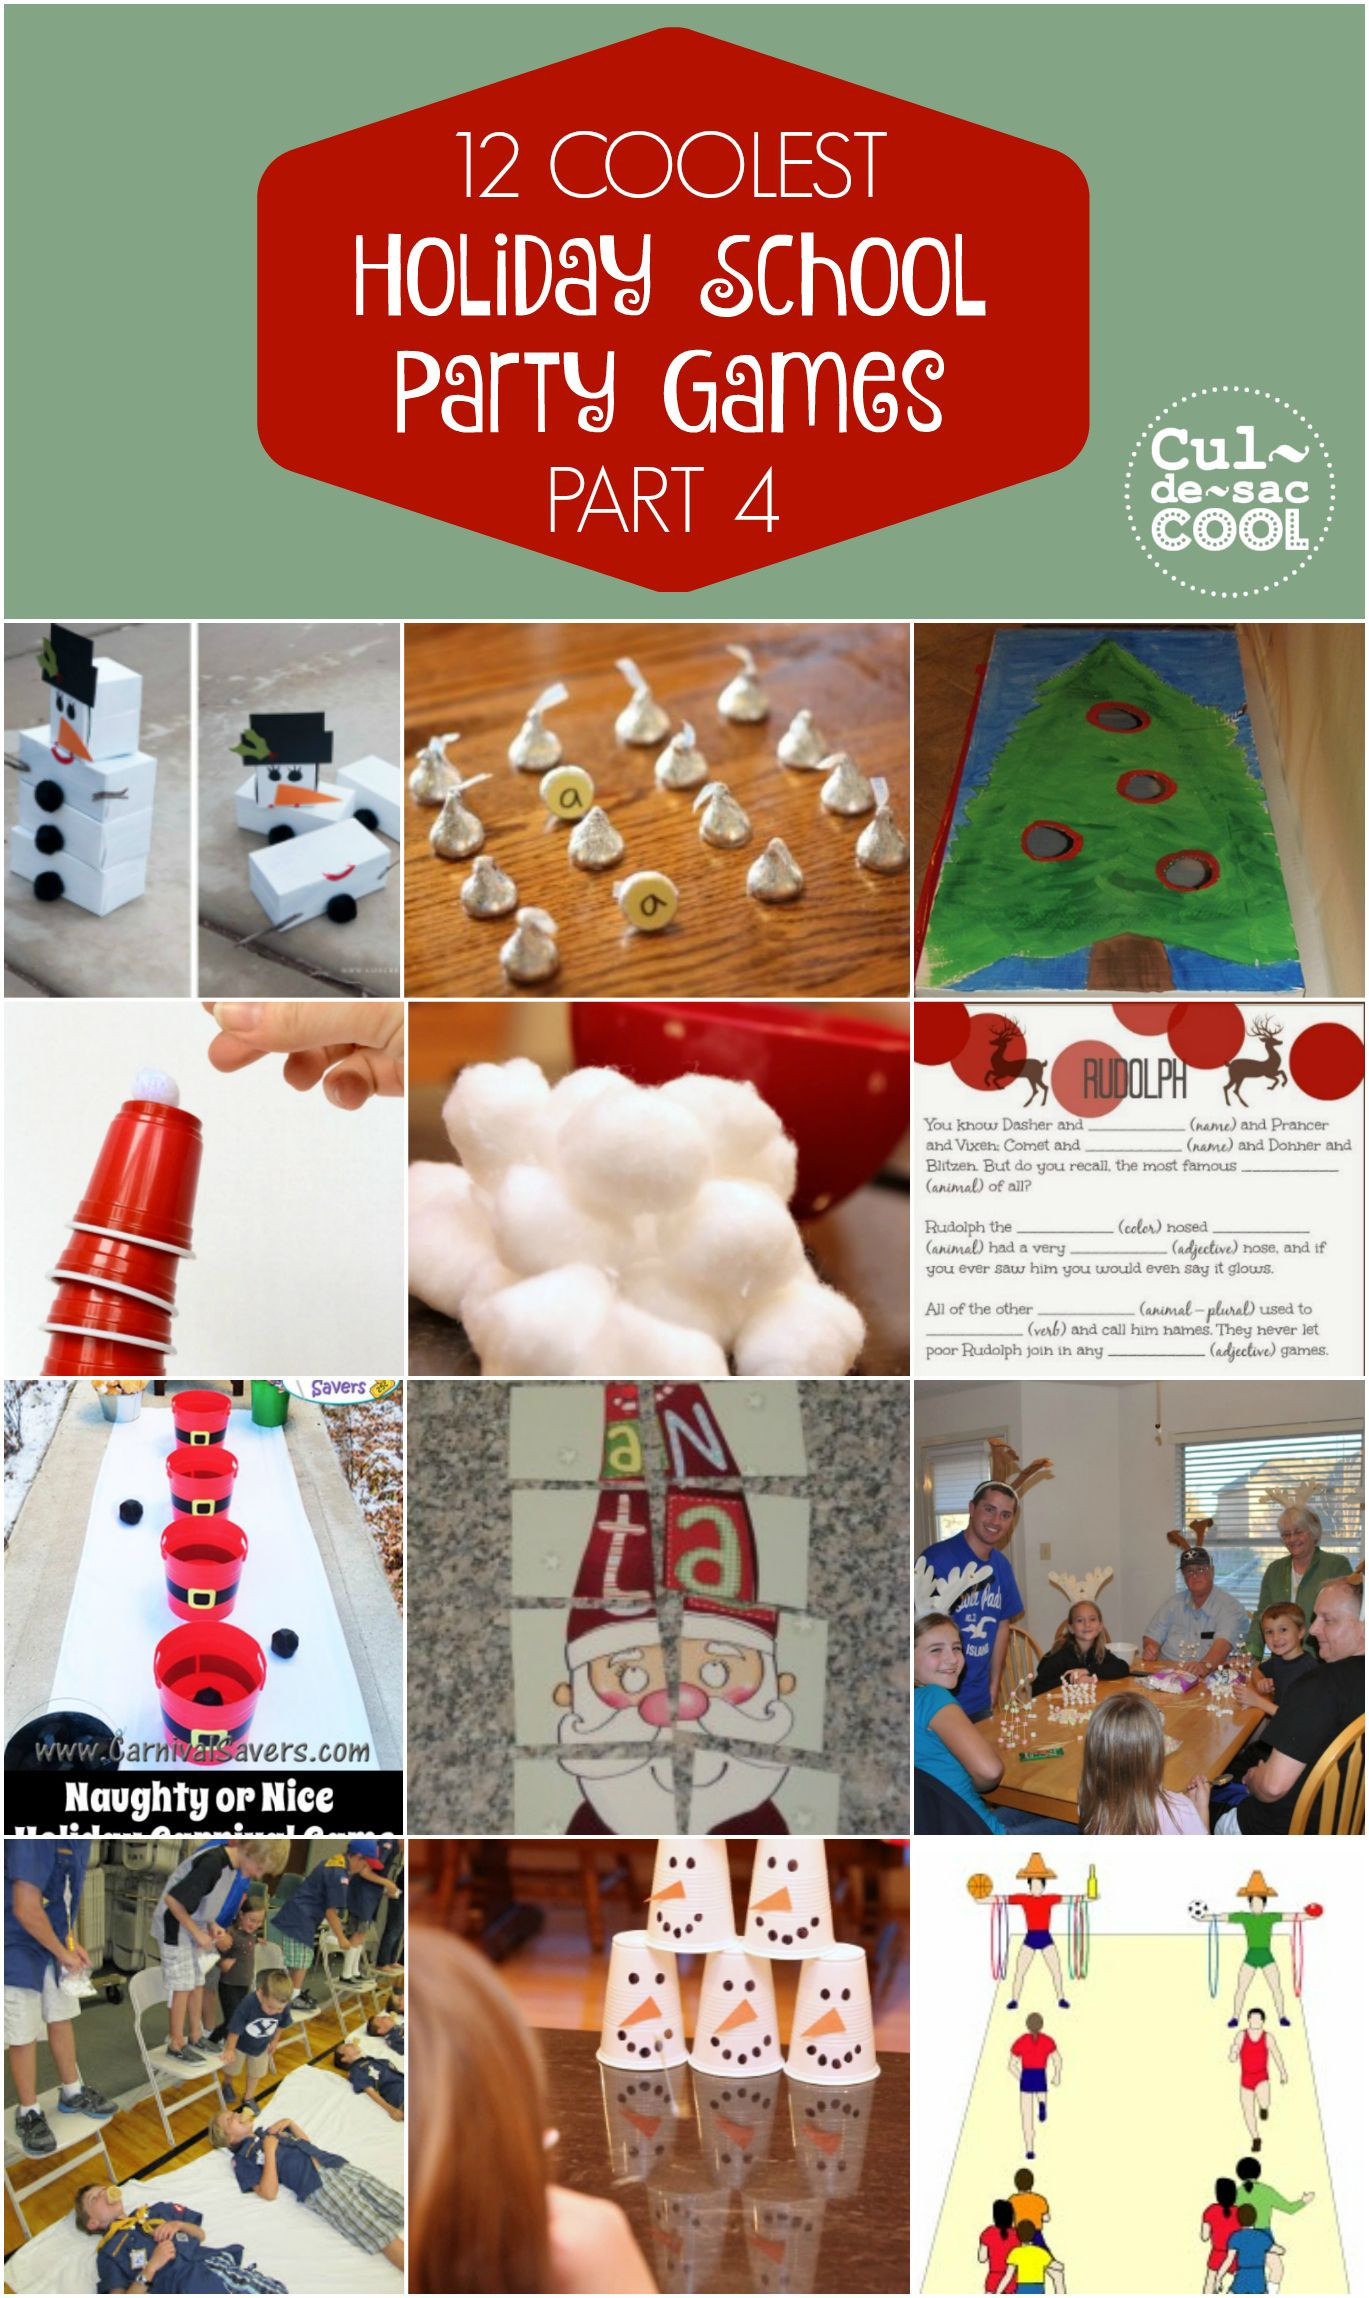 6Th Grade Christmas Party Ideas
 12 COOLEST HOLIDAY SCHOOL PARTY GAMES — PART 4 Games for